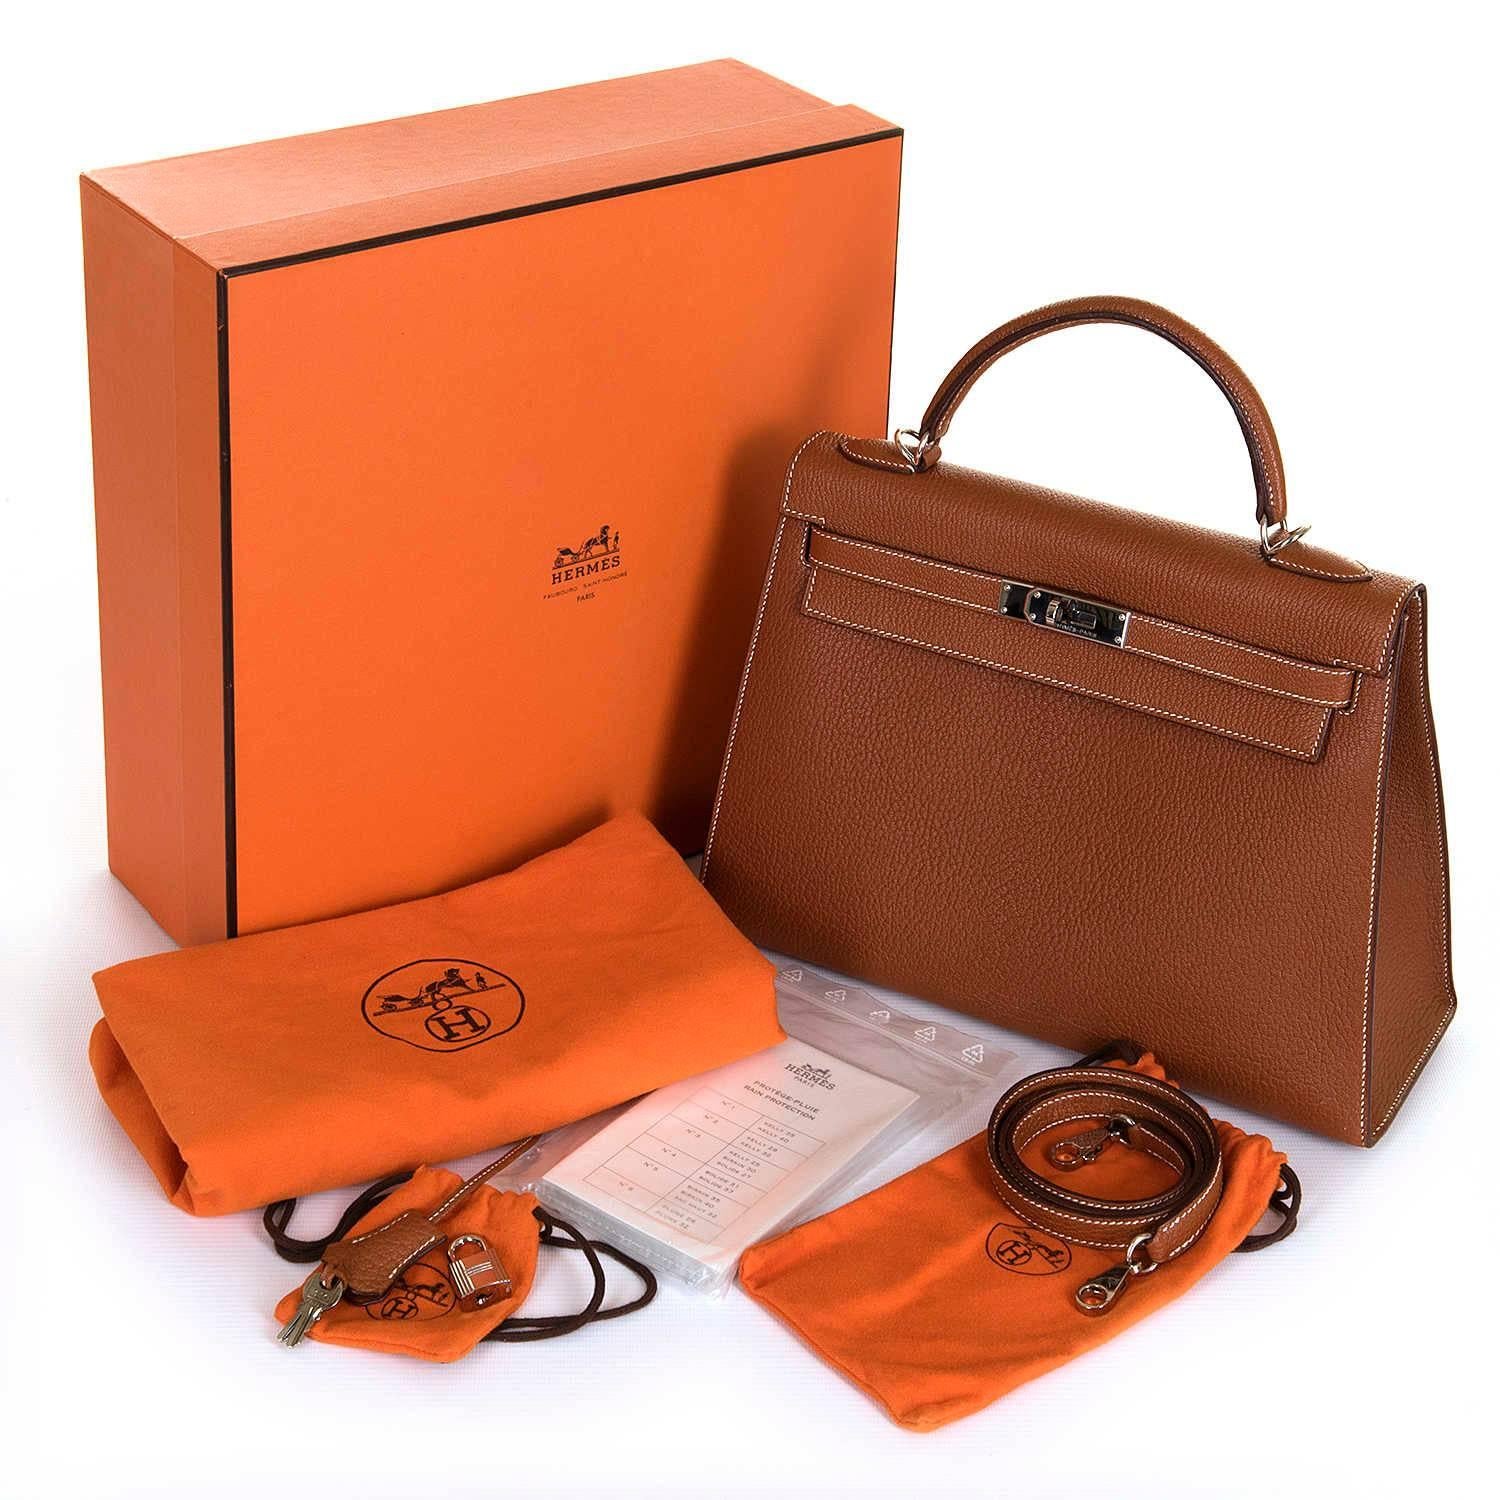 As New Pristine Hermes 32cm Kelly Sellier Bag in 'Rouille' Clemence Leather SHW 5